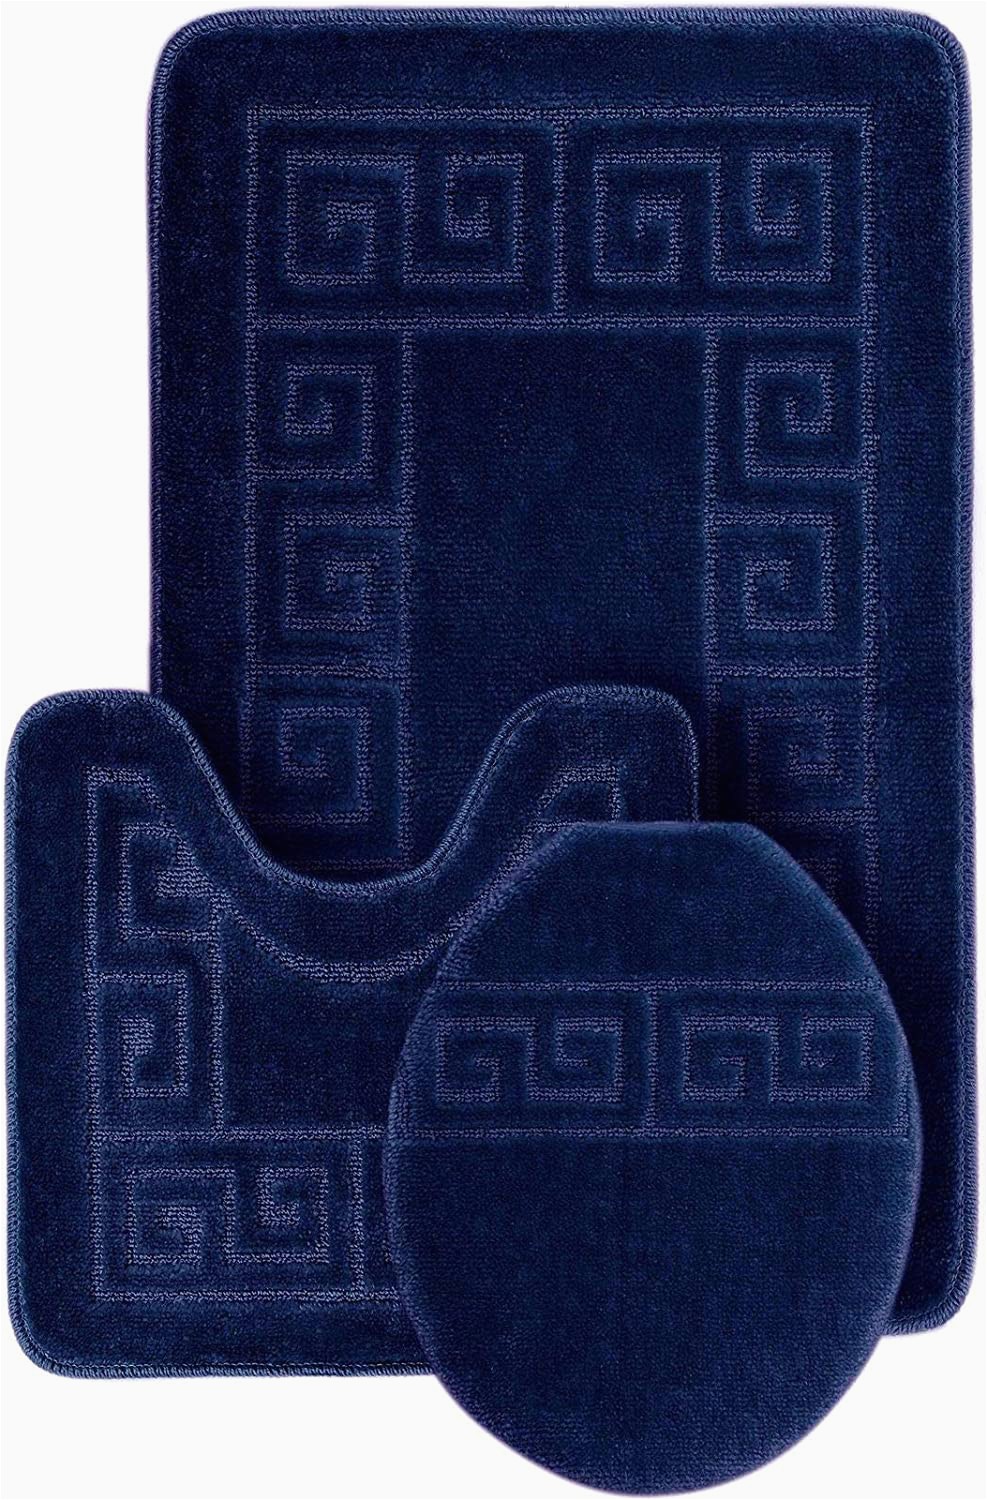 Washable Bathroom Rug Sets Wpm World Products Mart Bathroom Rugs Set 3 Piece Bath Pattern Rug 20"x32" Contour Mats 20"x20" with Lid Cover Navy